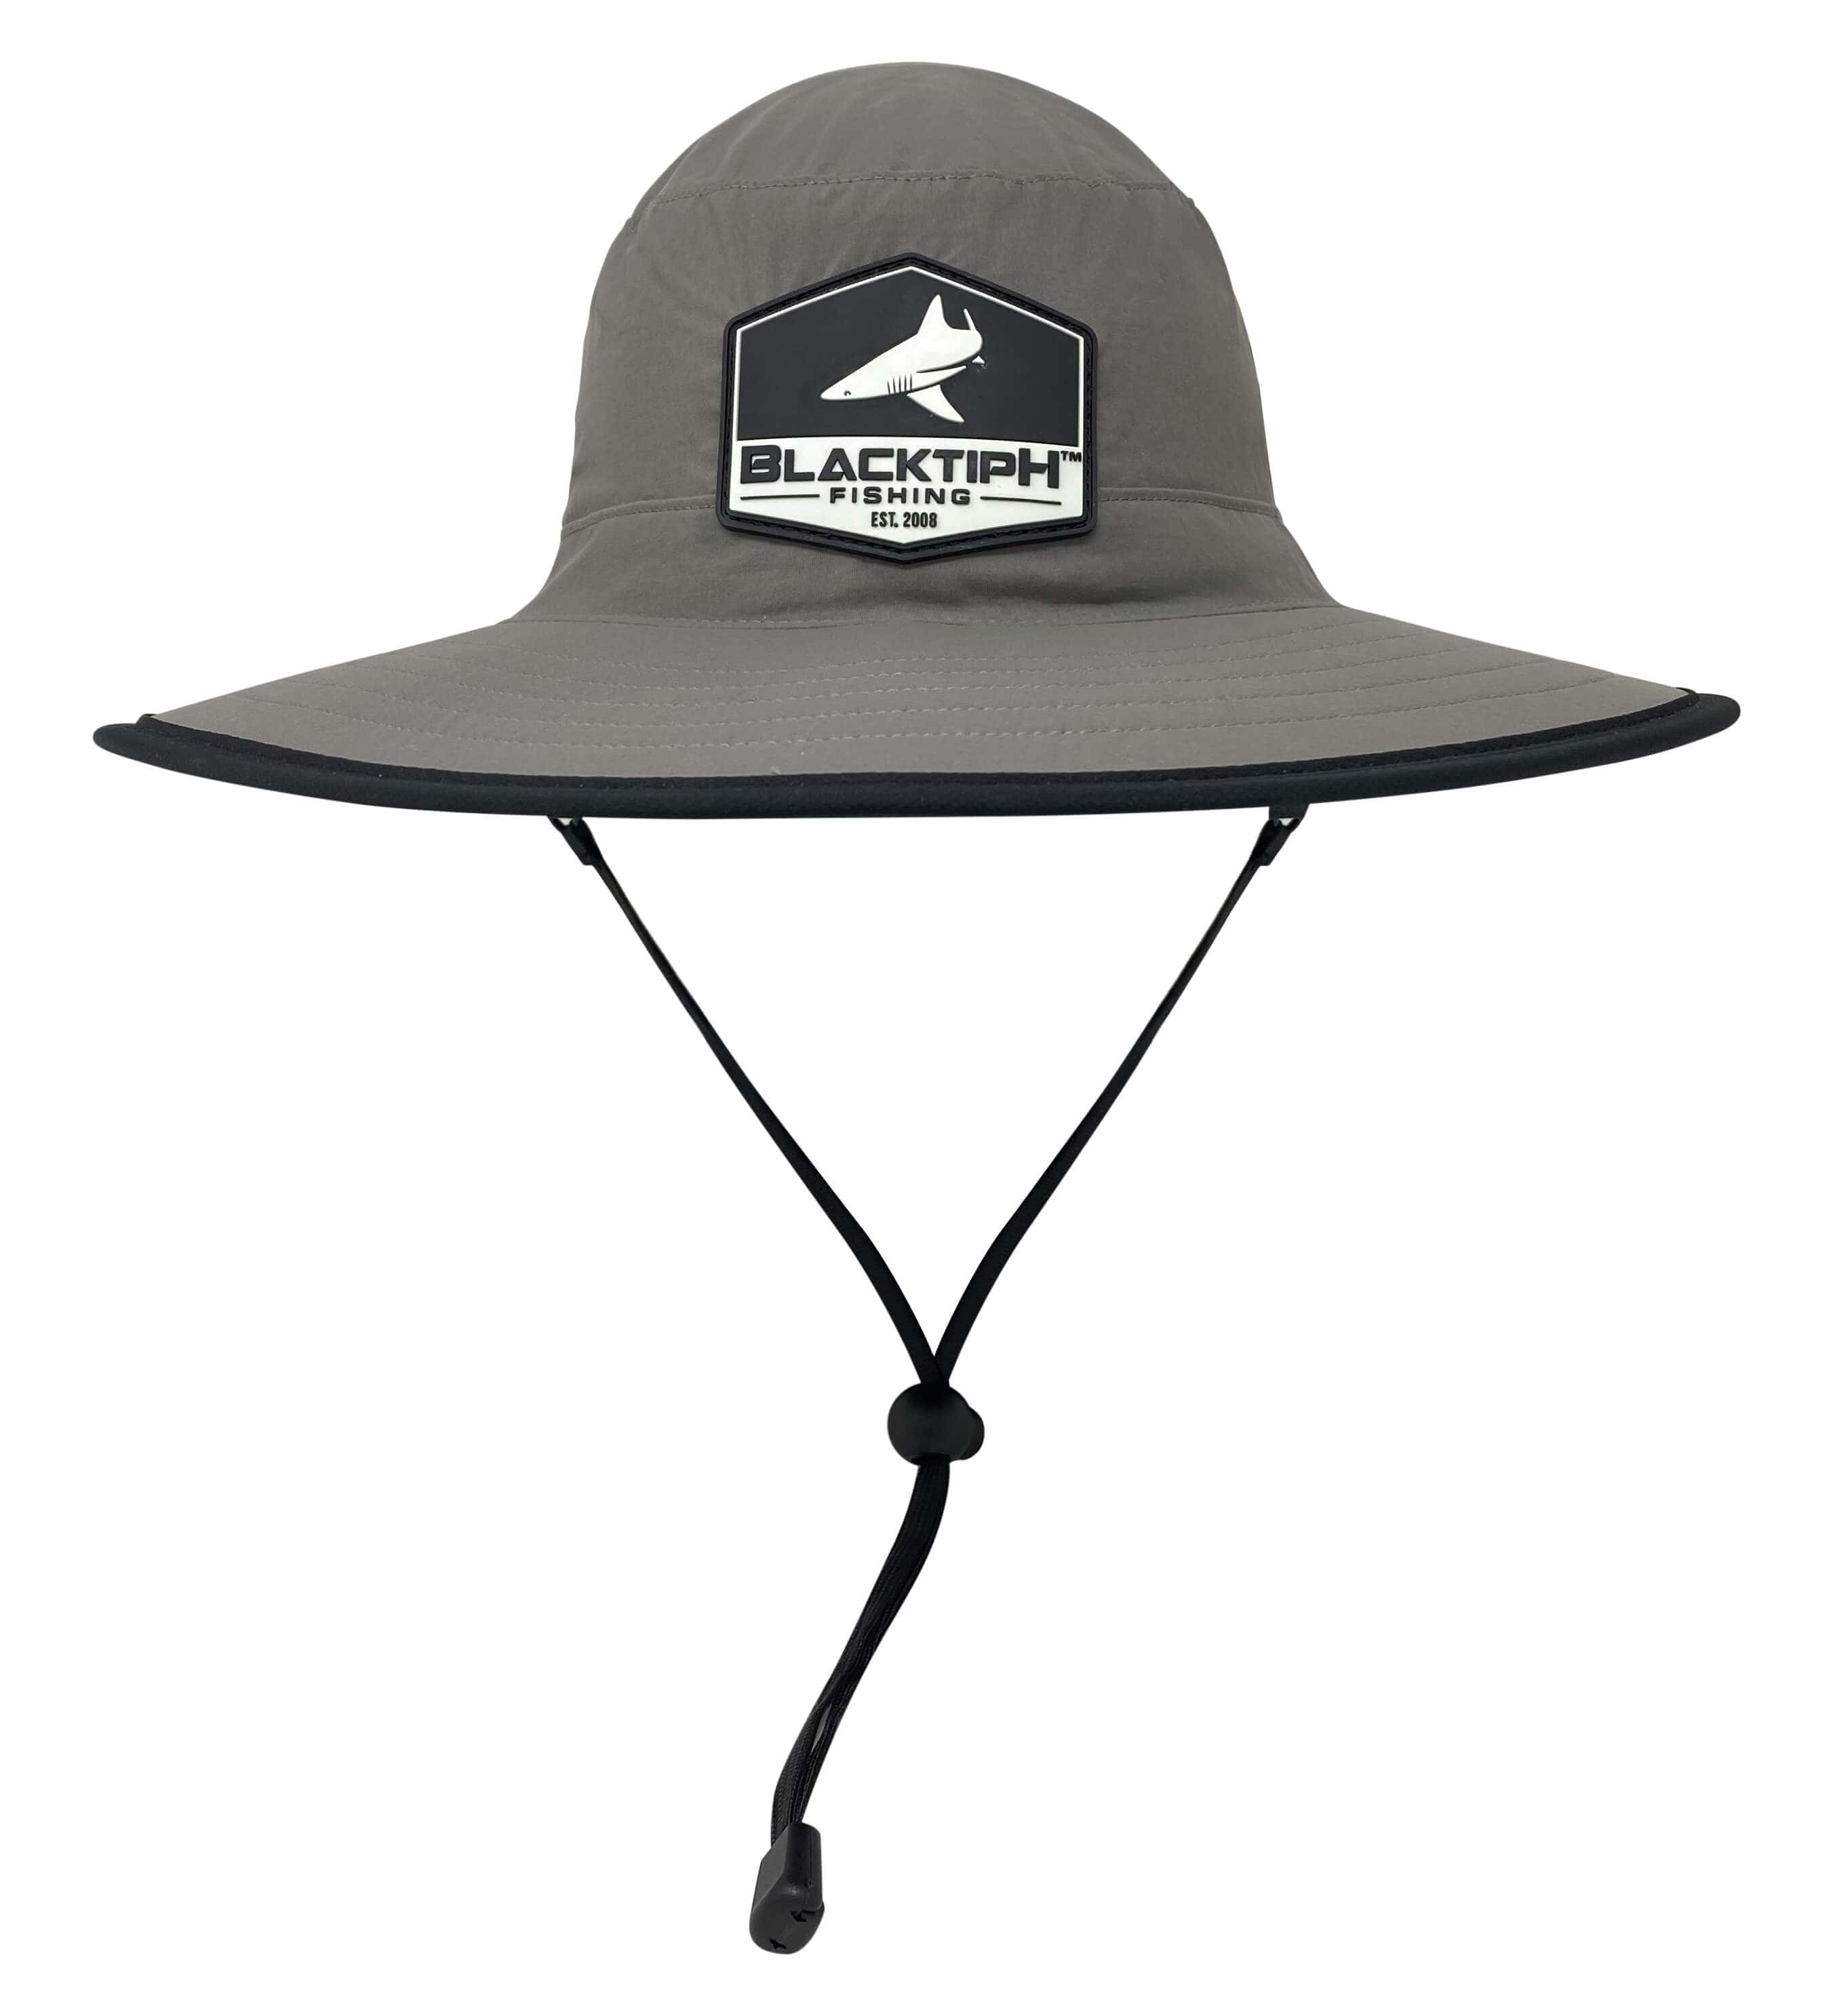 BlacktipH Bucket Fishing Hat in Green with Charcoal Rim | Size Small/Medium